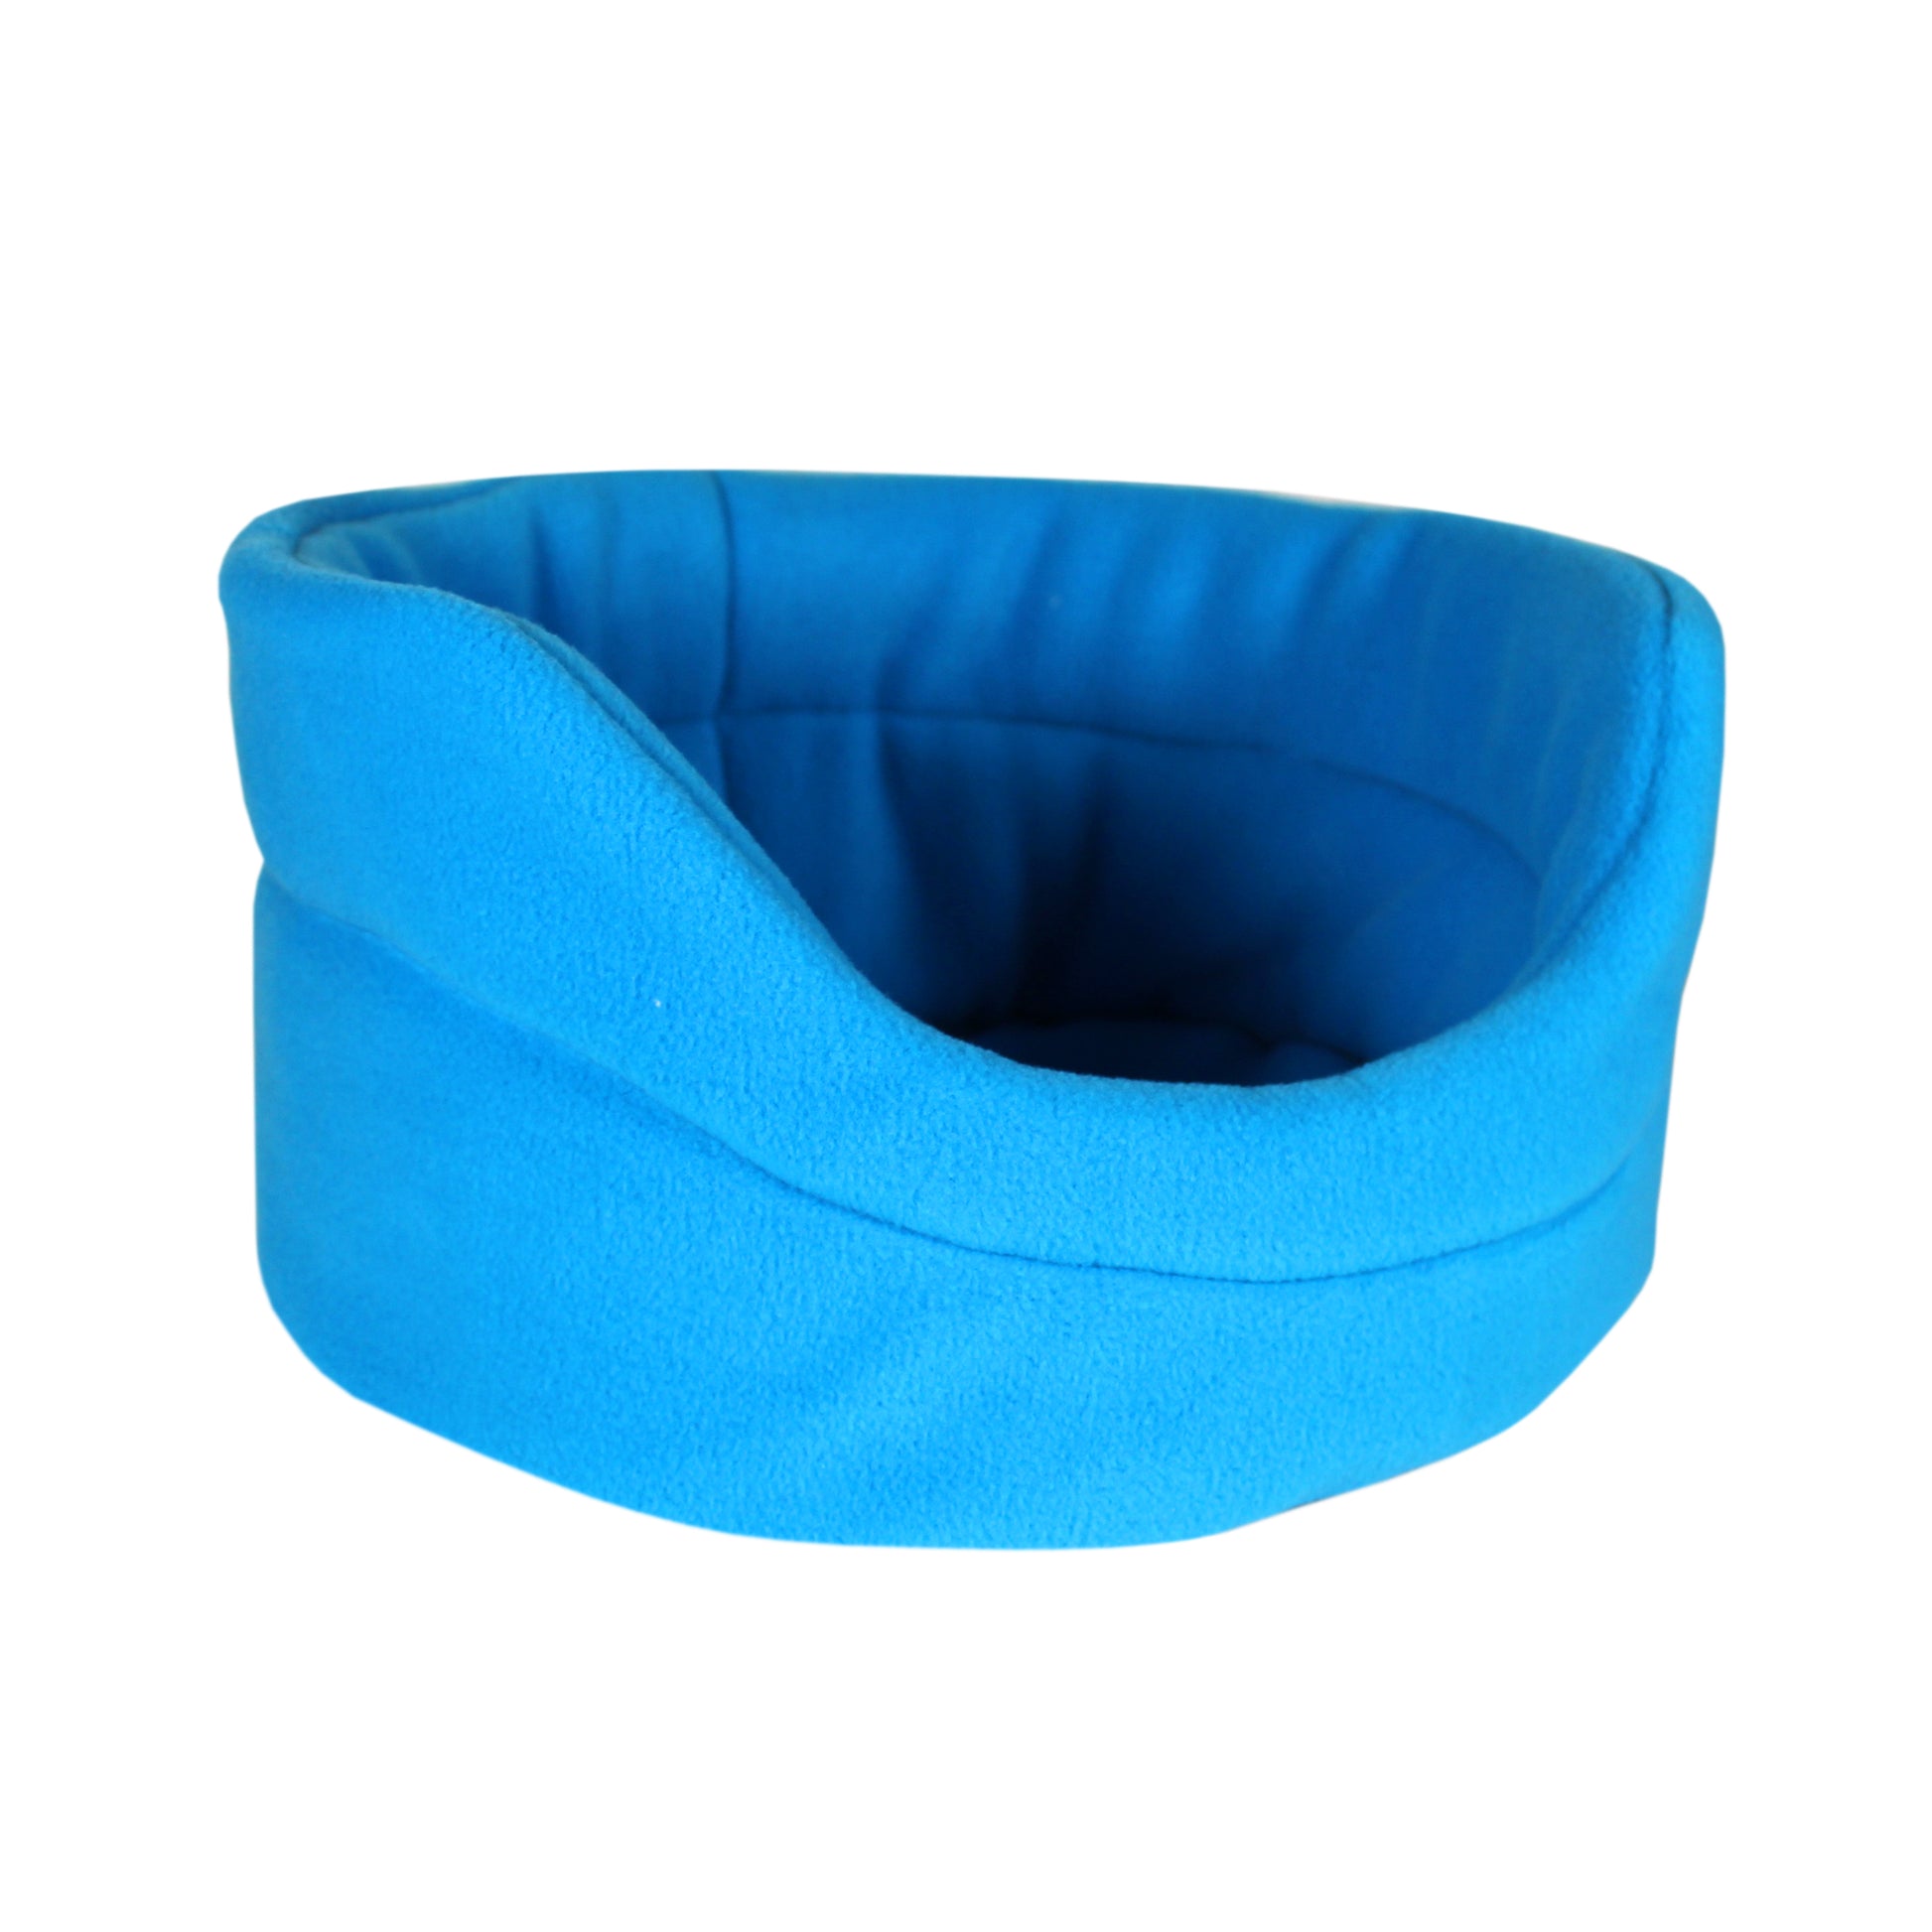 Rich Blue Guinea Pig Bed, side view of the cuddle cup for guinea pigs showing the rich blue colour